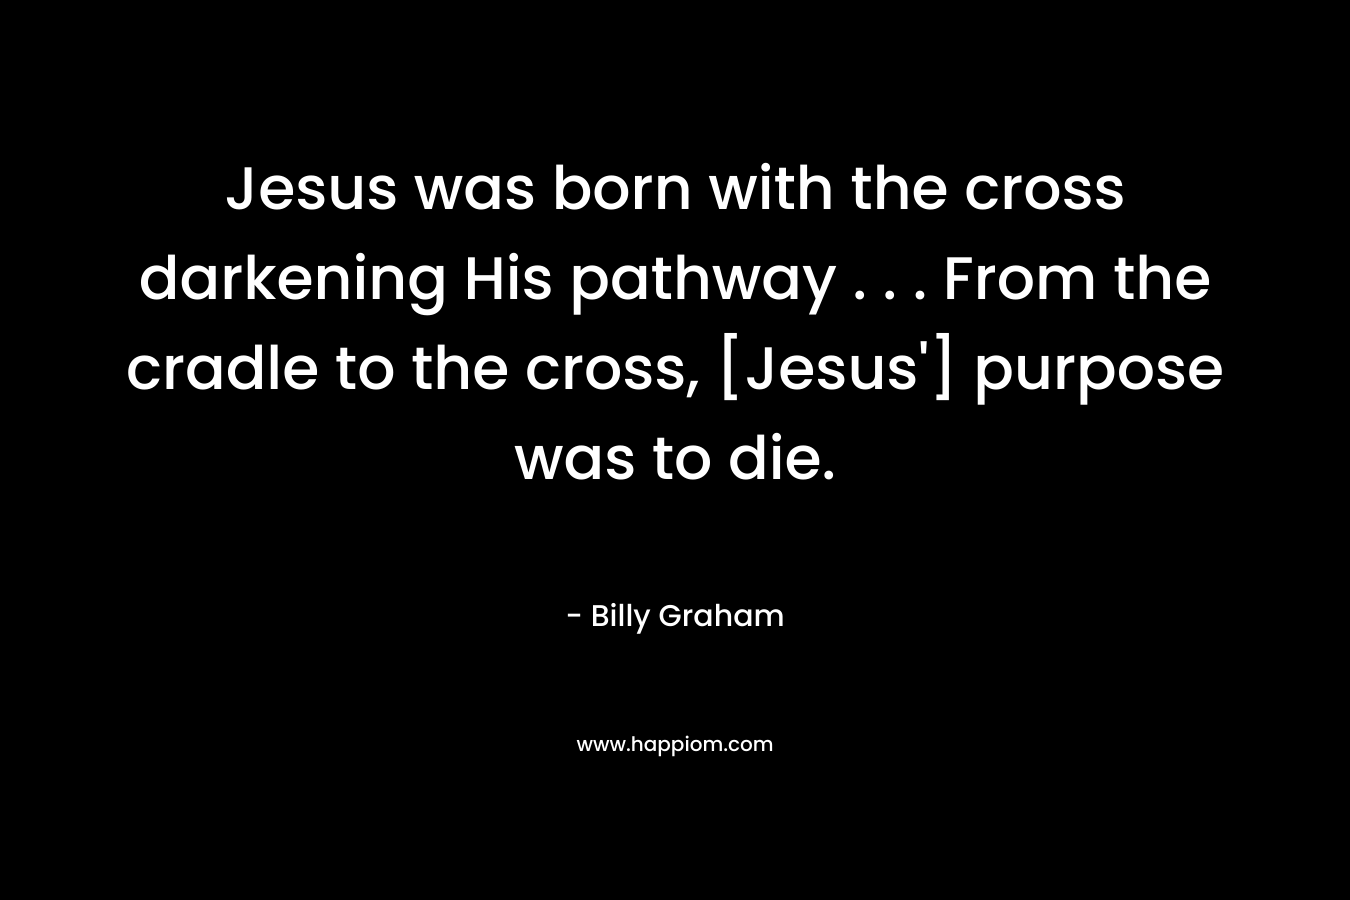 Jesus was born with the cross darkening His pathway . . . From the cradle to the cross, [Jesus’] purpose was to die. – Billy Graham